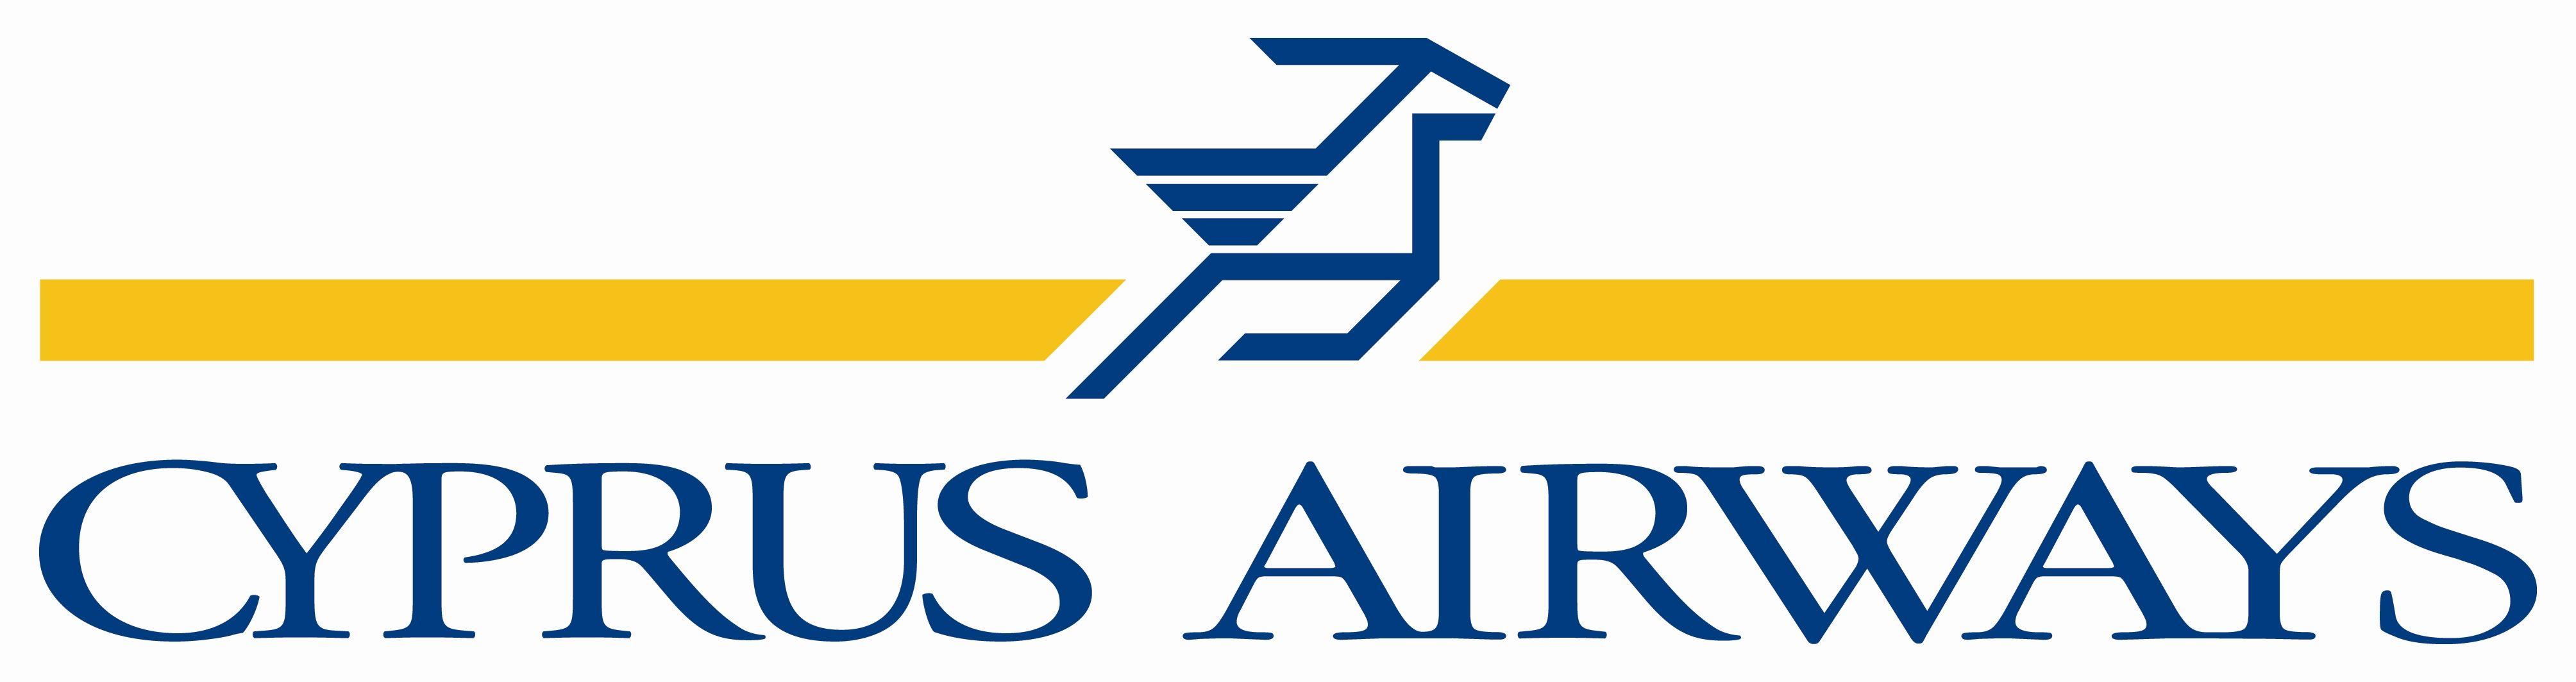 Yellow and Blue Airline Logo - Cyprus-Airways-Logo - My Aviation News